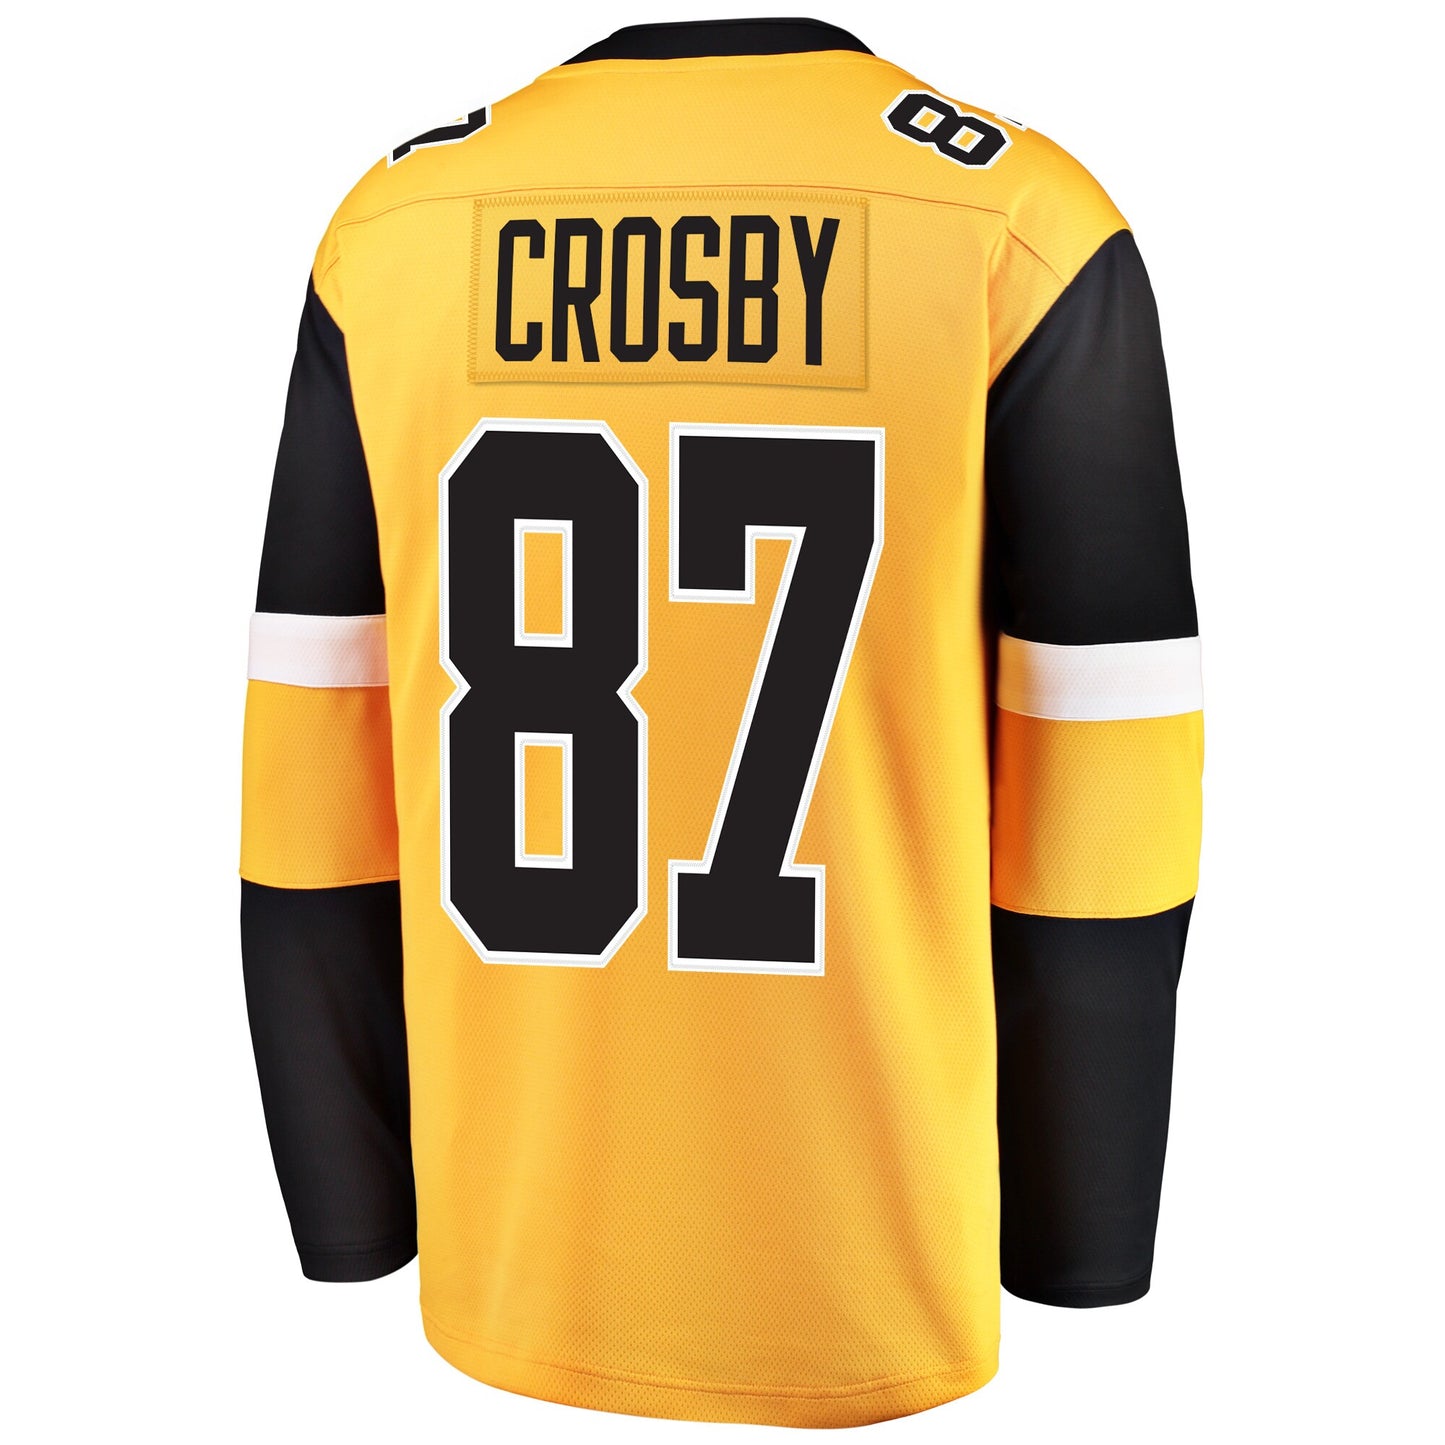 Sidney Crosby Pittsburgh Penguins Fanatics Branded Youth Alternate Breakaway Player Jersey - Gold